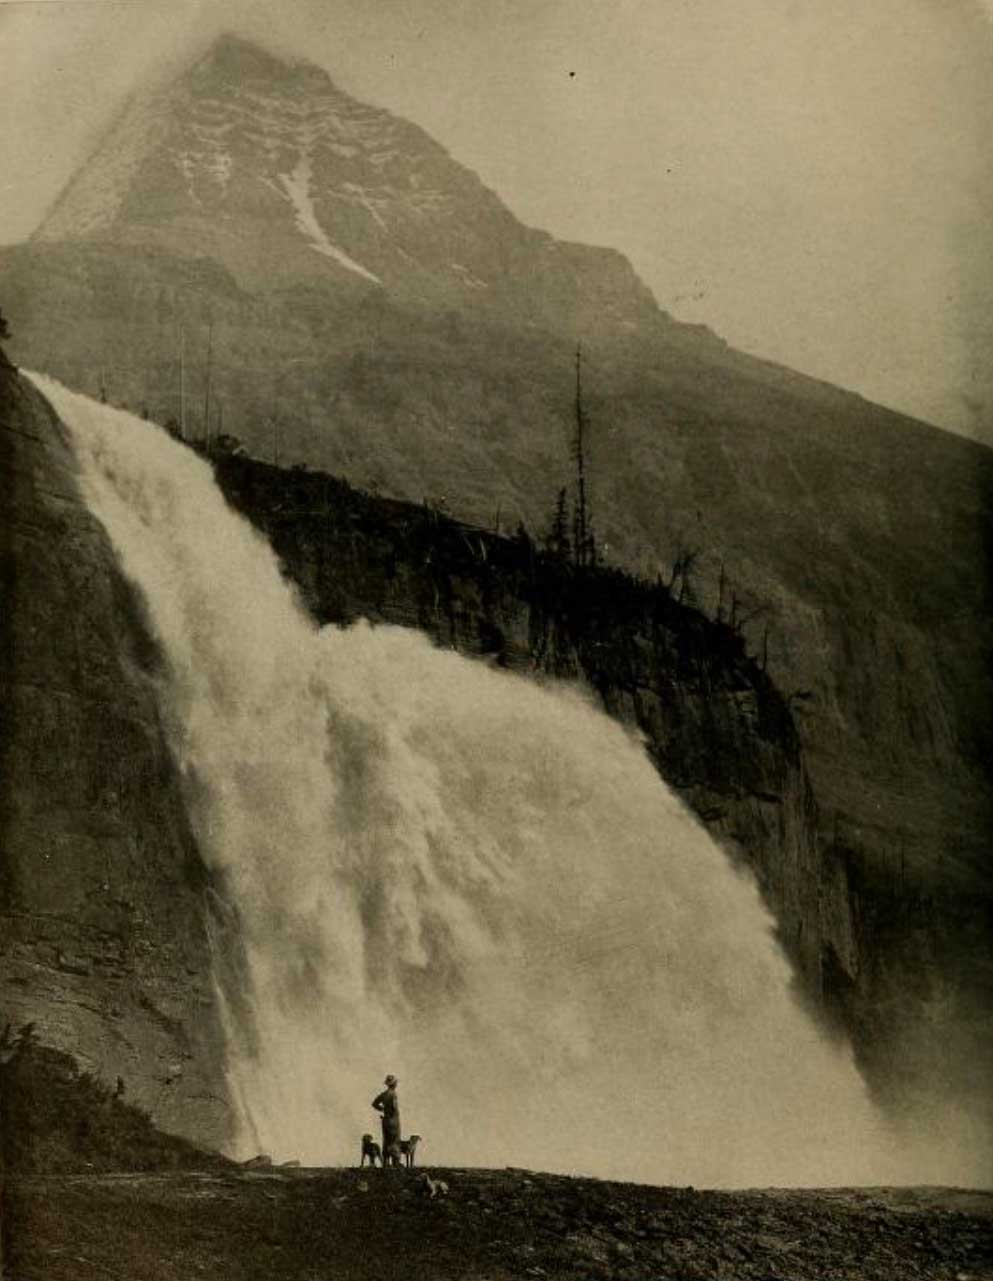 Emperor Falls, with Robson Peak above. Photo by R. C. W. Lett, courtesy of Grand Trunk Pacific Railway, 1913